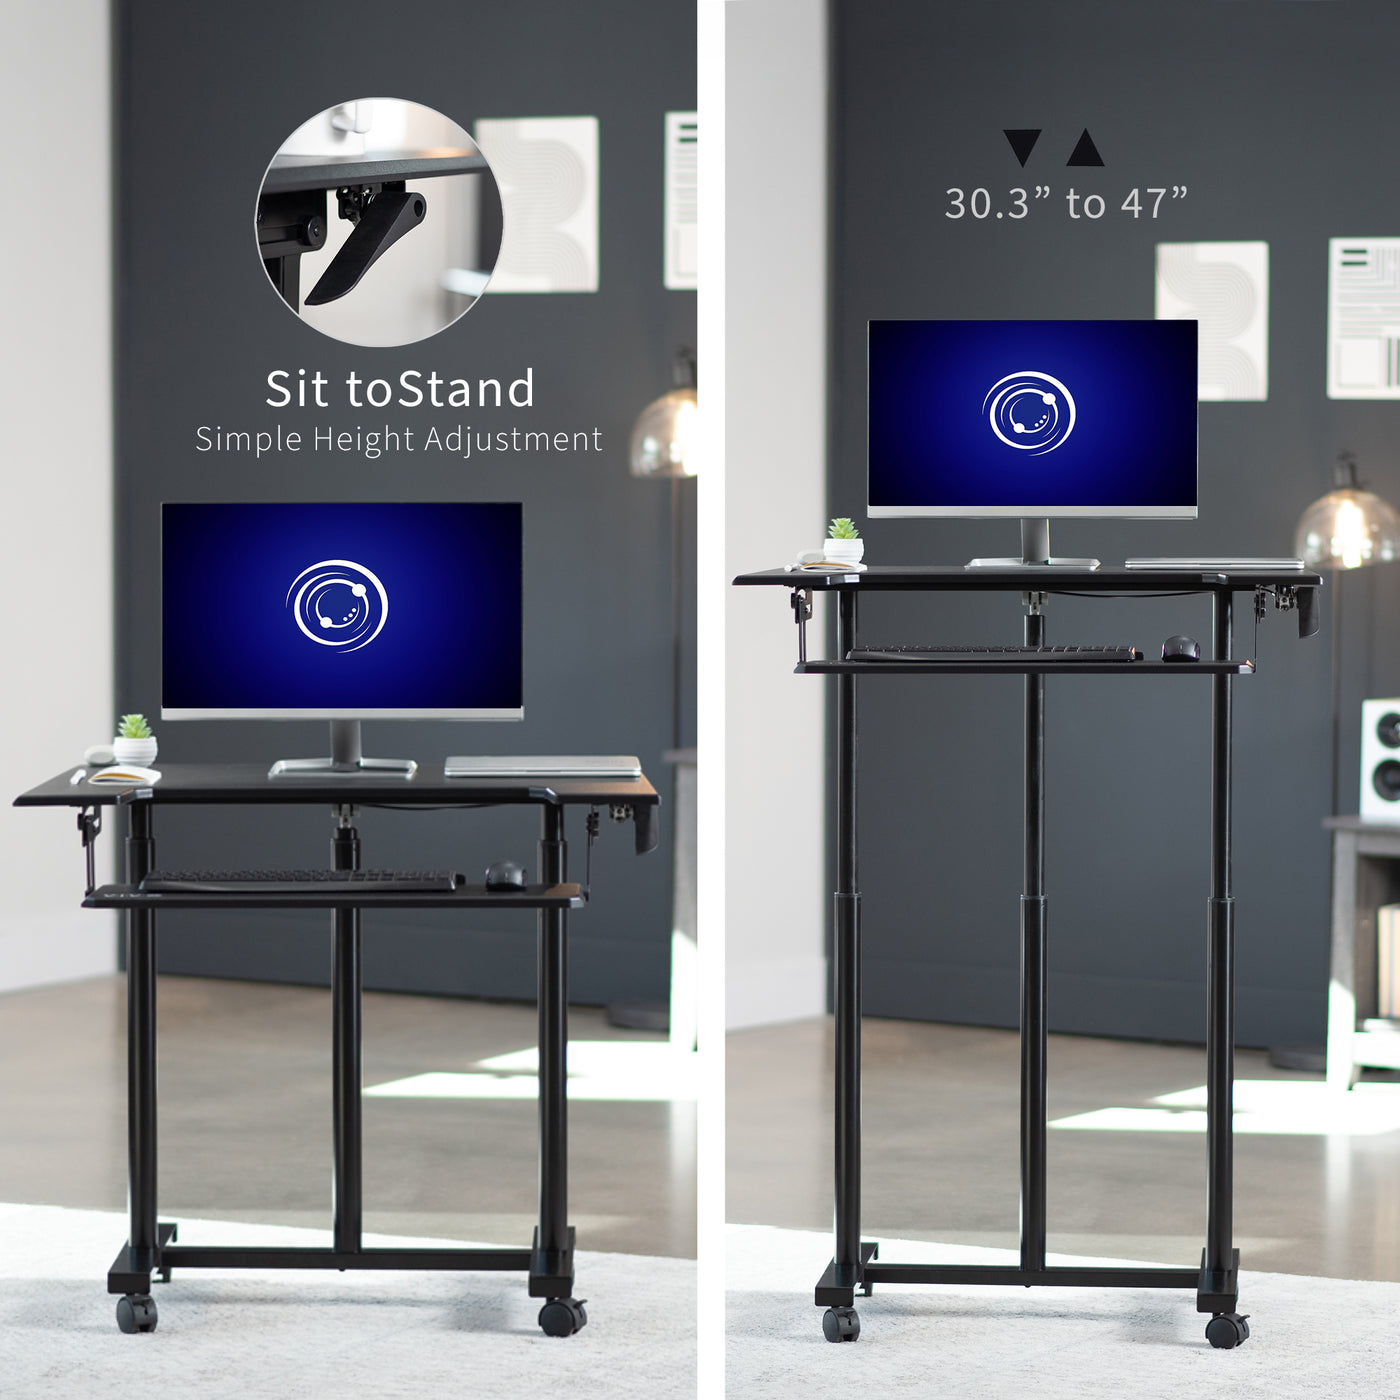 Ergonomic mobile adjustable computer workstation cart with simple height adjustment for sit to stand workstation.